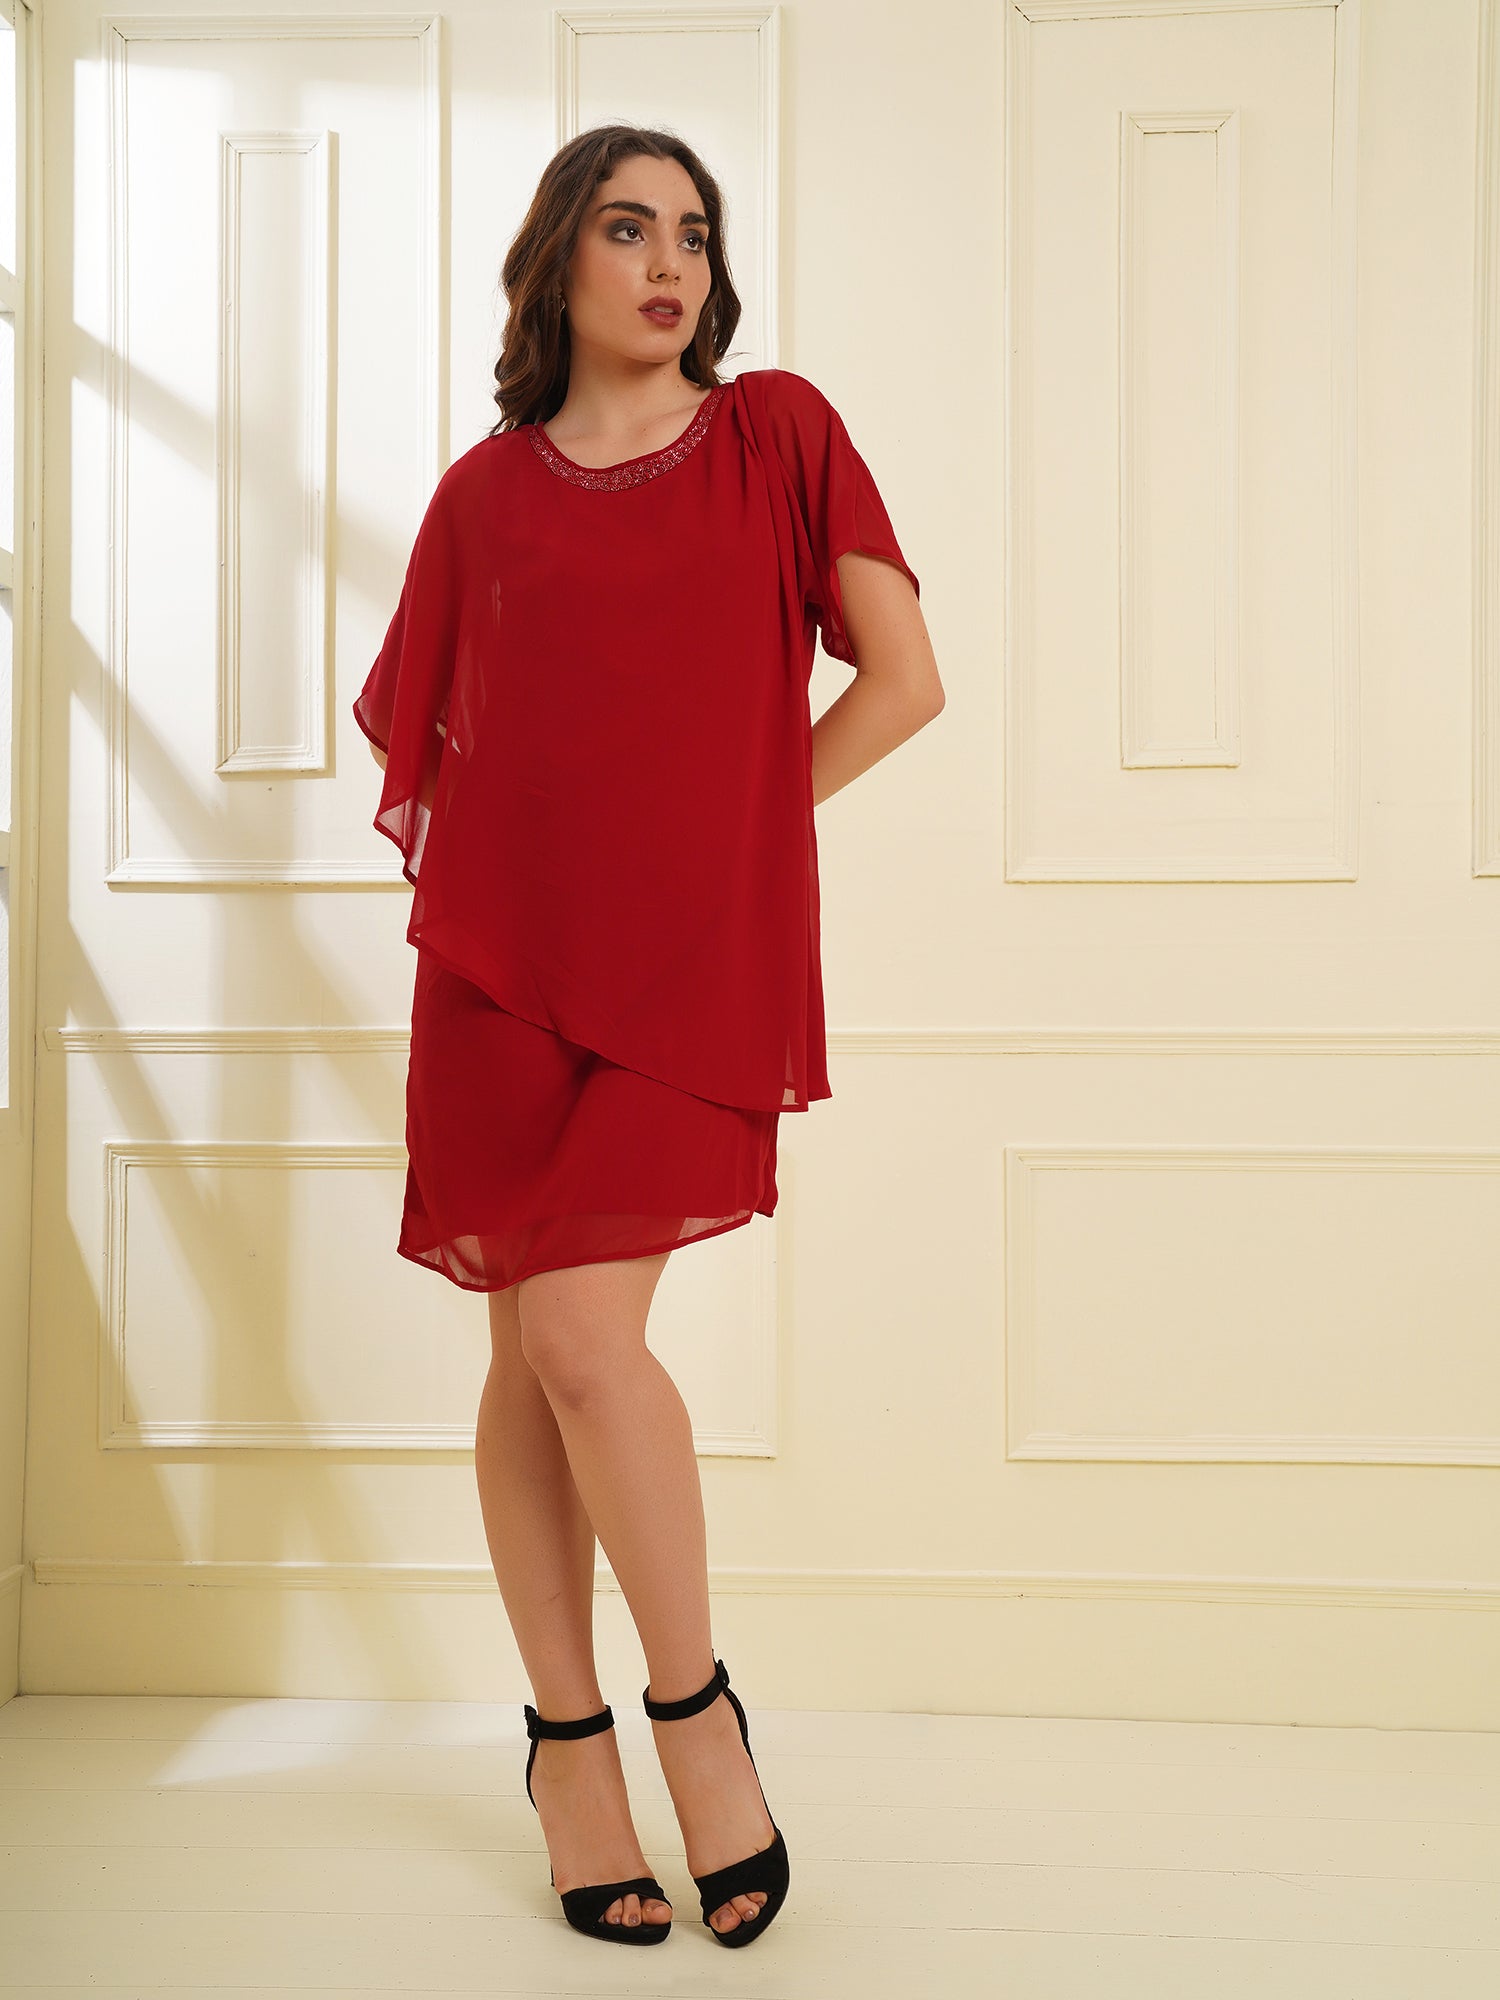 attic curves popover red dress with neck embellishment